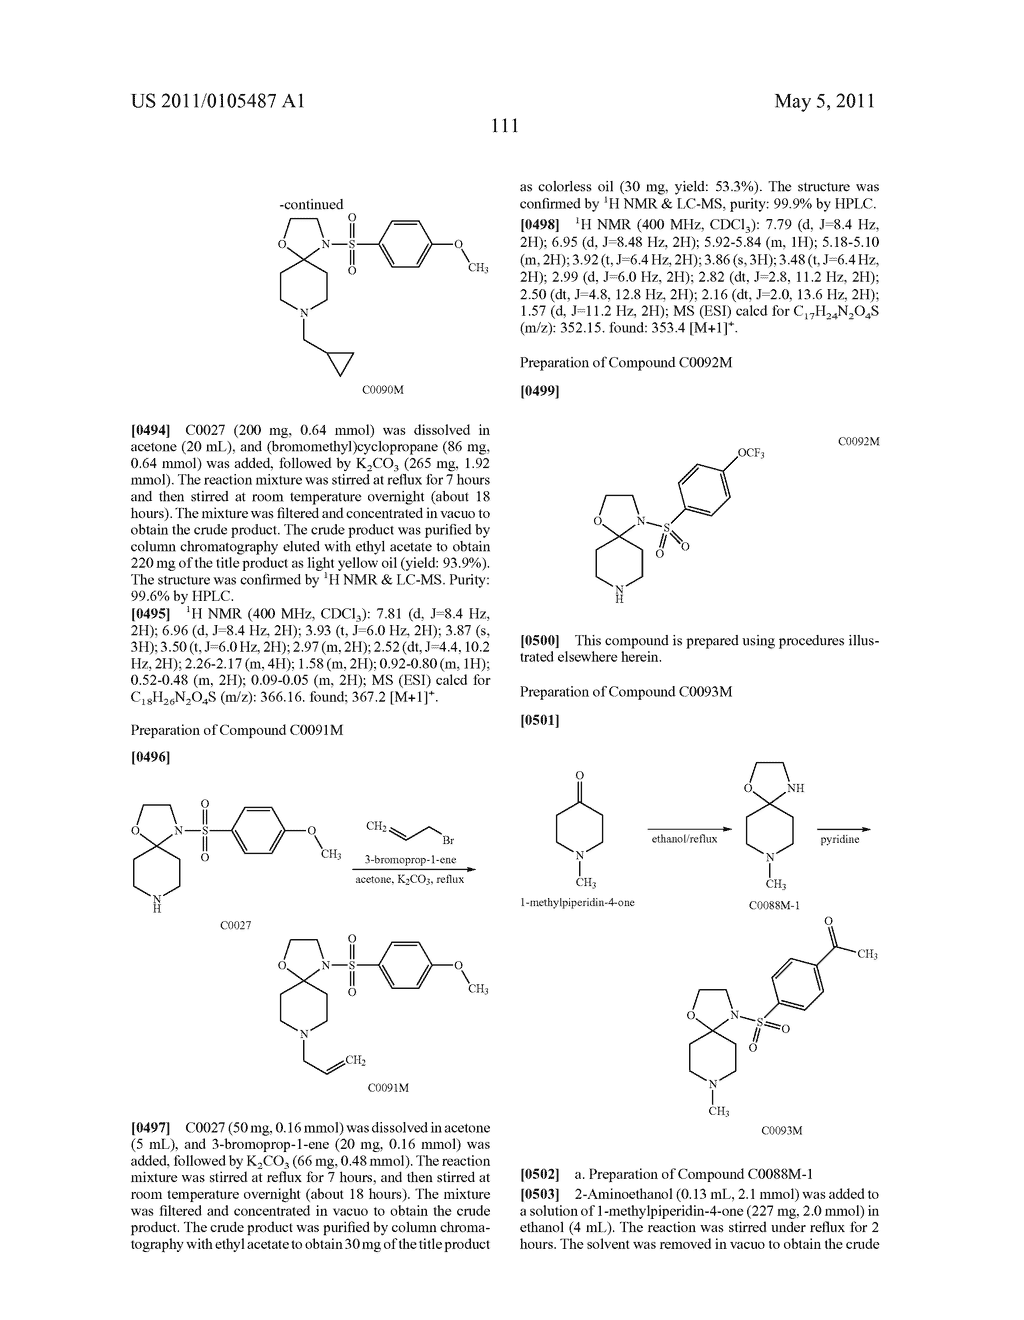 FILAMIN A BINDING ANTI-INFLAMMATORY AND ANALGESIC - diagram, schematic, and image 112